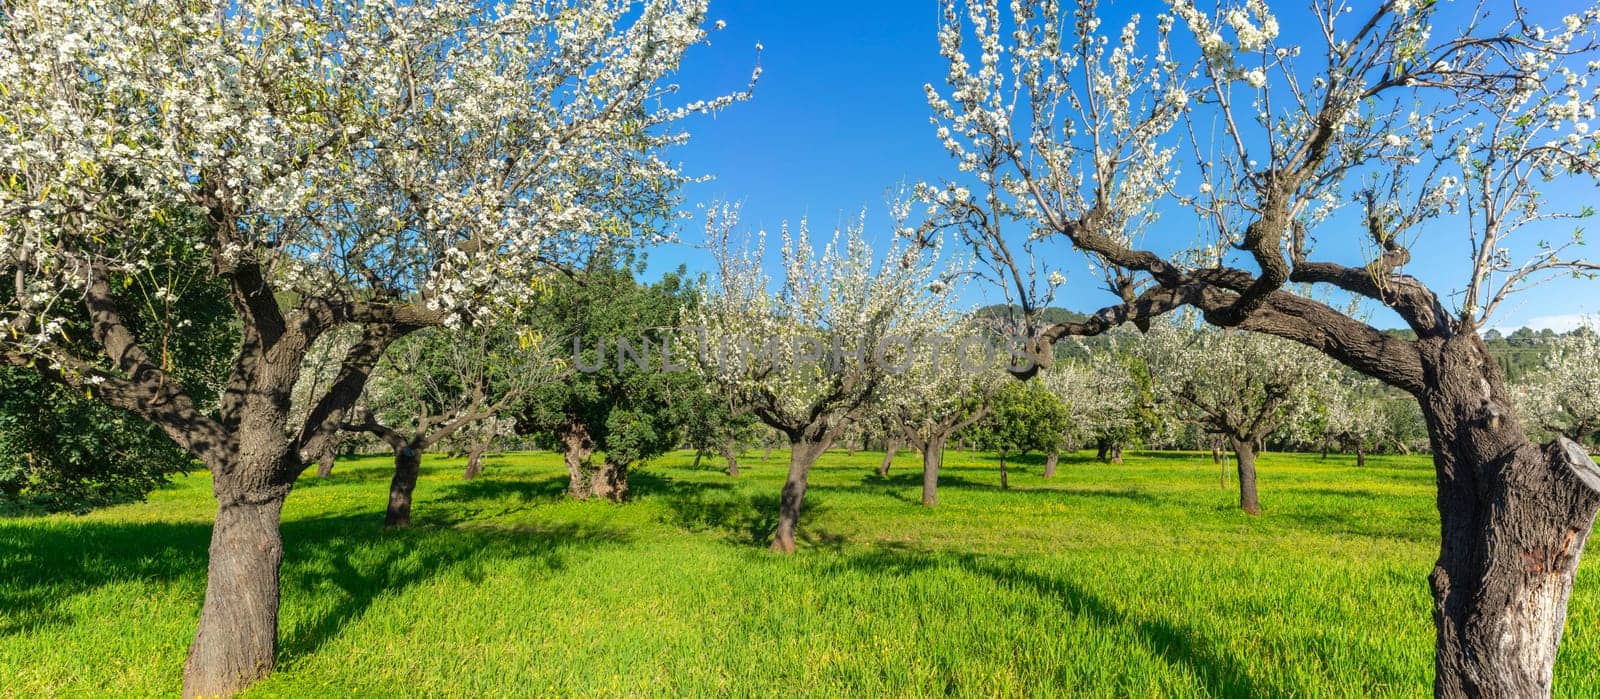 A panoramic view of an orchard reveals a canopy of white blossoms stretching across the frame. The gnarled tree trunks rise from the vibrant green grass, creating a stark yet harmonious contrast under the clear blue sky